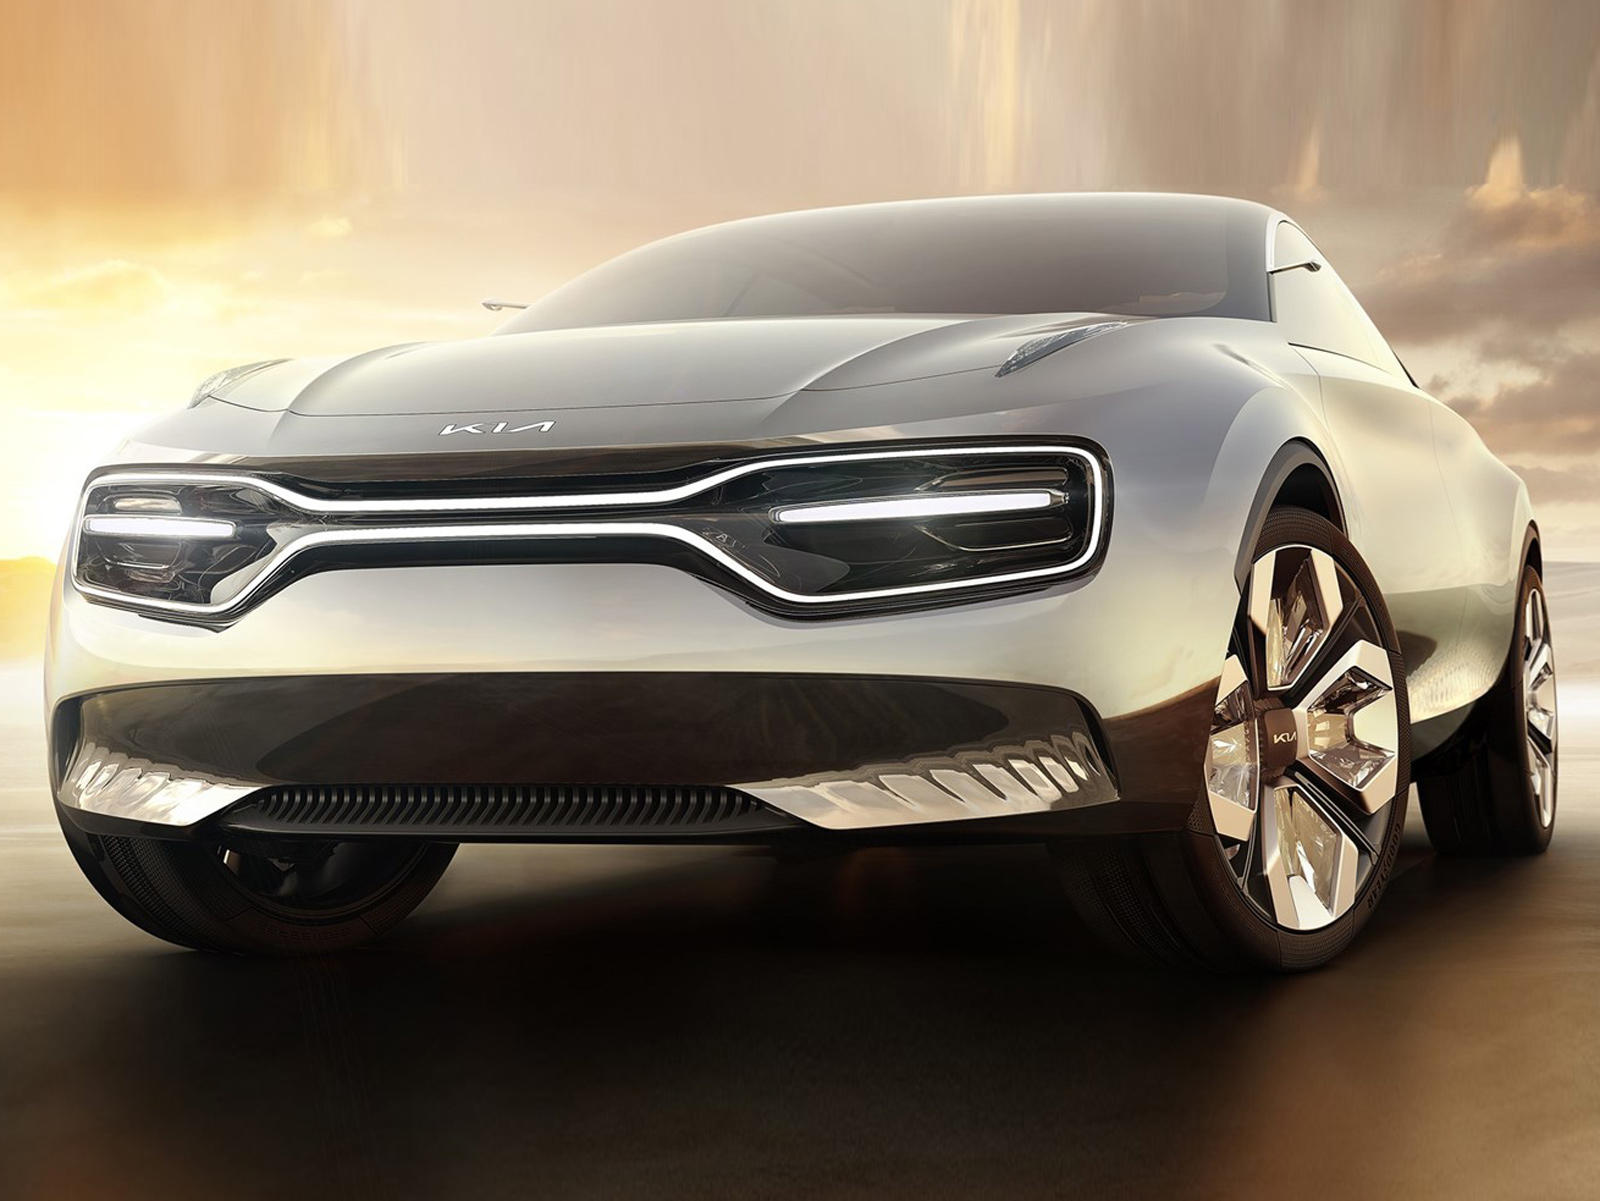 Kia's Next SUV Will Look Absolutely Stunning | CarBuzz